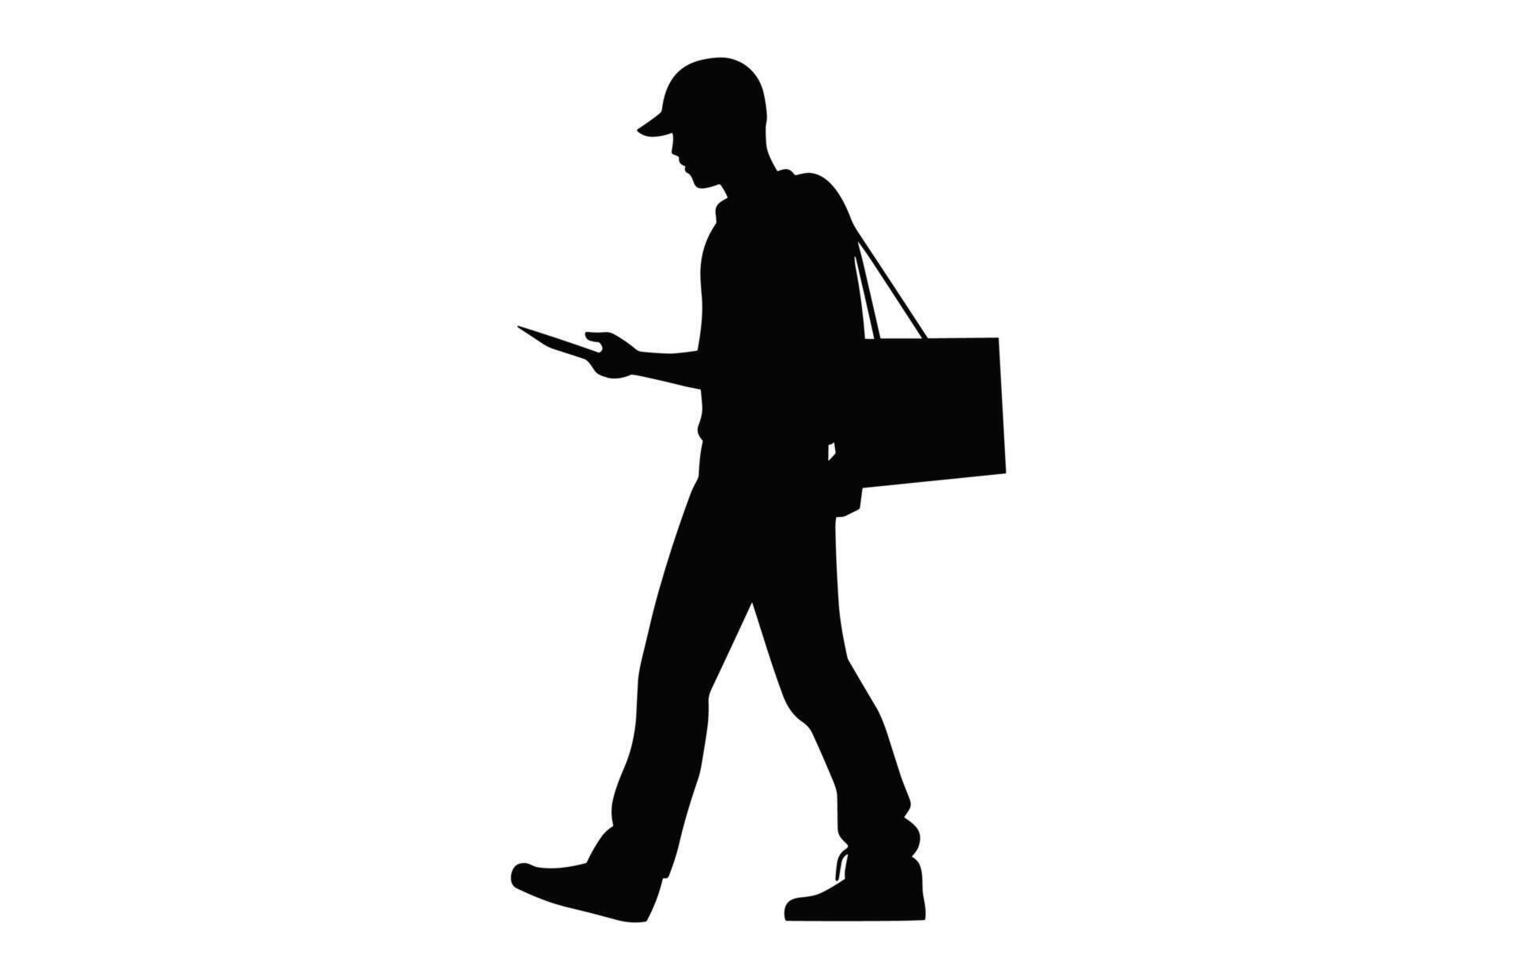 Delivery Man carrying box Silhouette isolated on a white background, Courier Service Carry a package black Vector